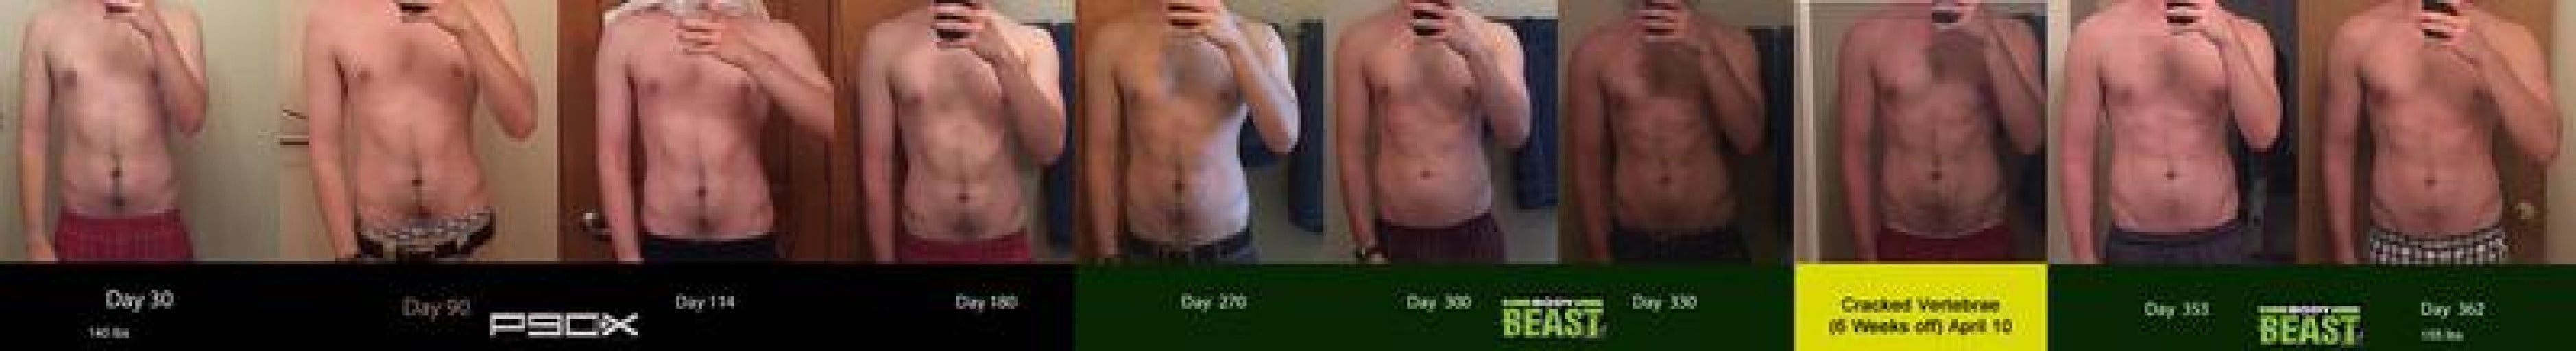 A before and after photo of a 6'0" male showing a weight gain from 140 pounds to 155 pounds. A total gain of 15 pounds.